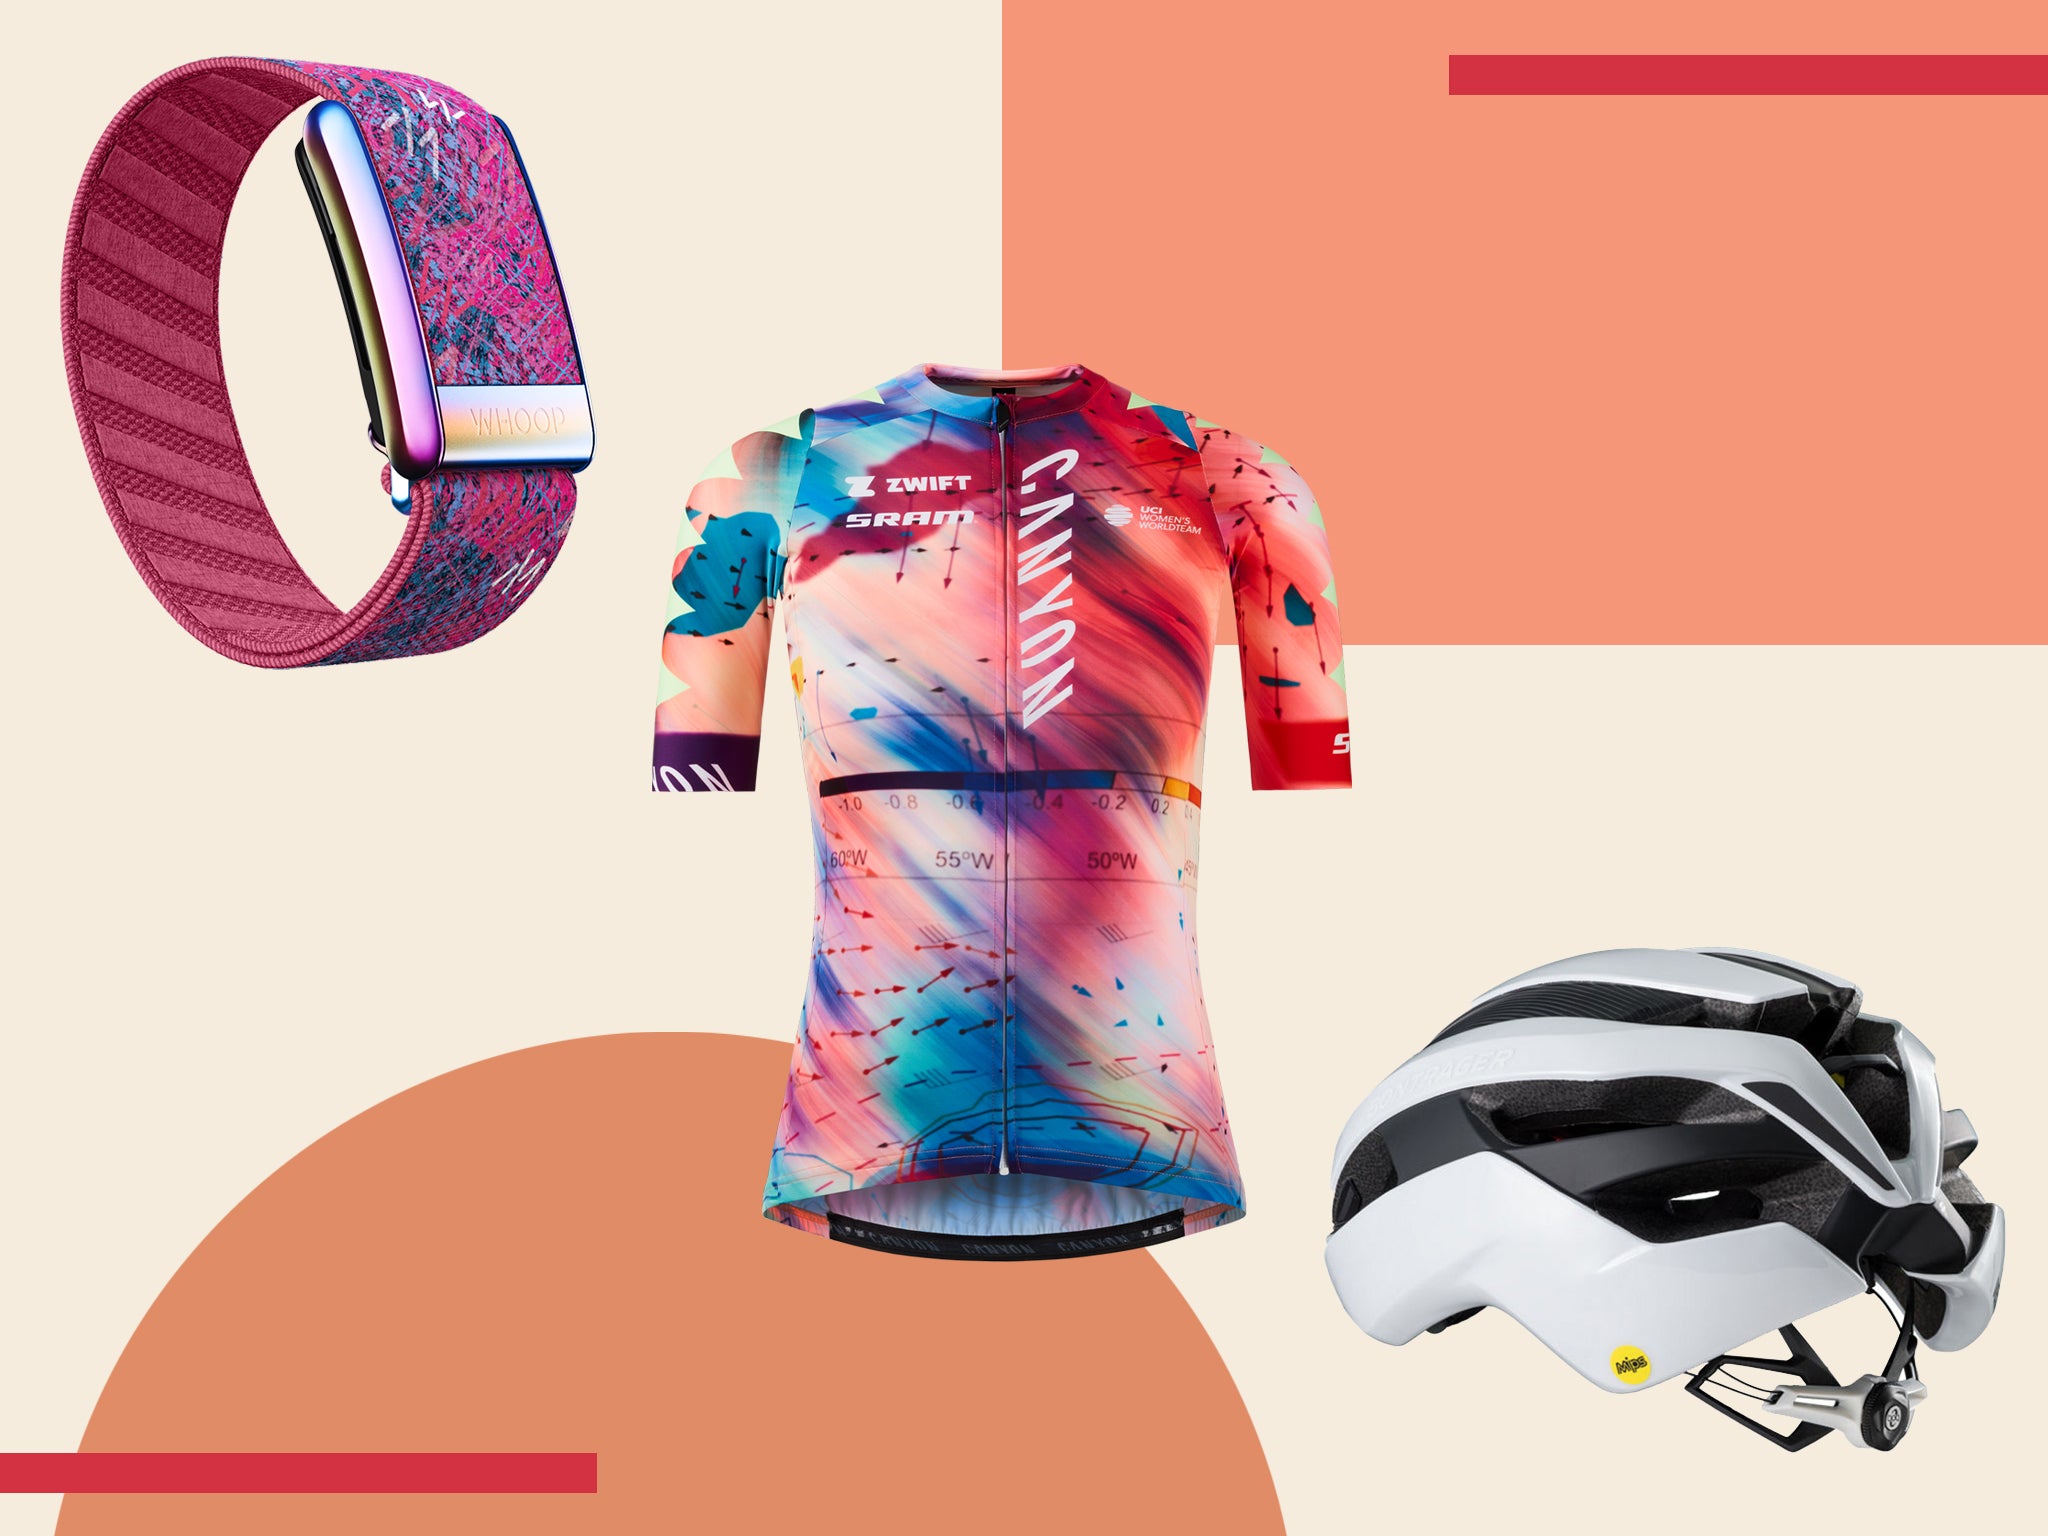 From shades to helmets, we’ve rounded up our favourites worn in the competition